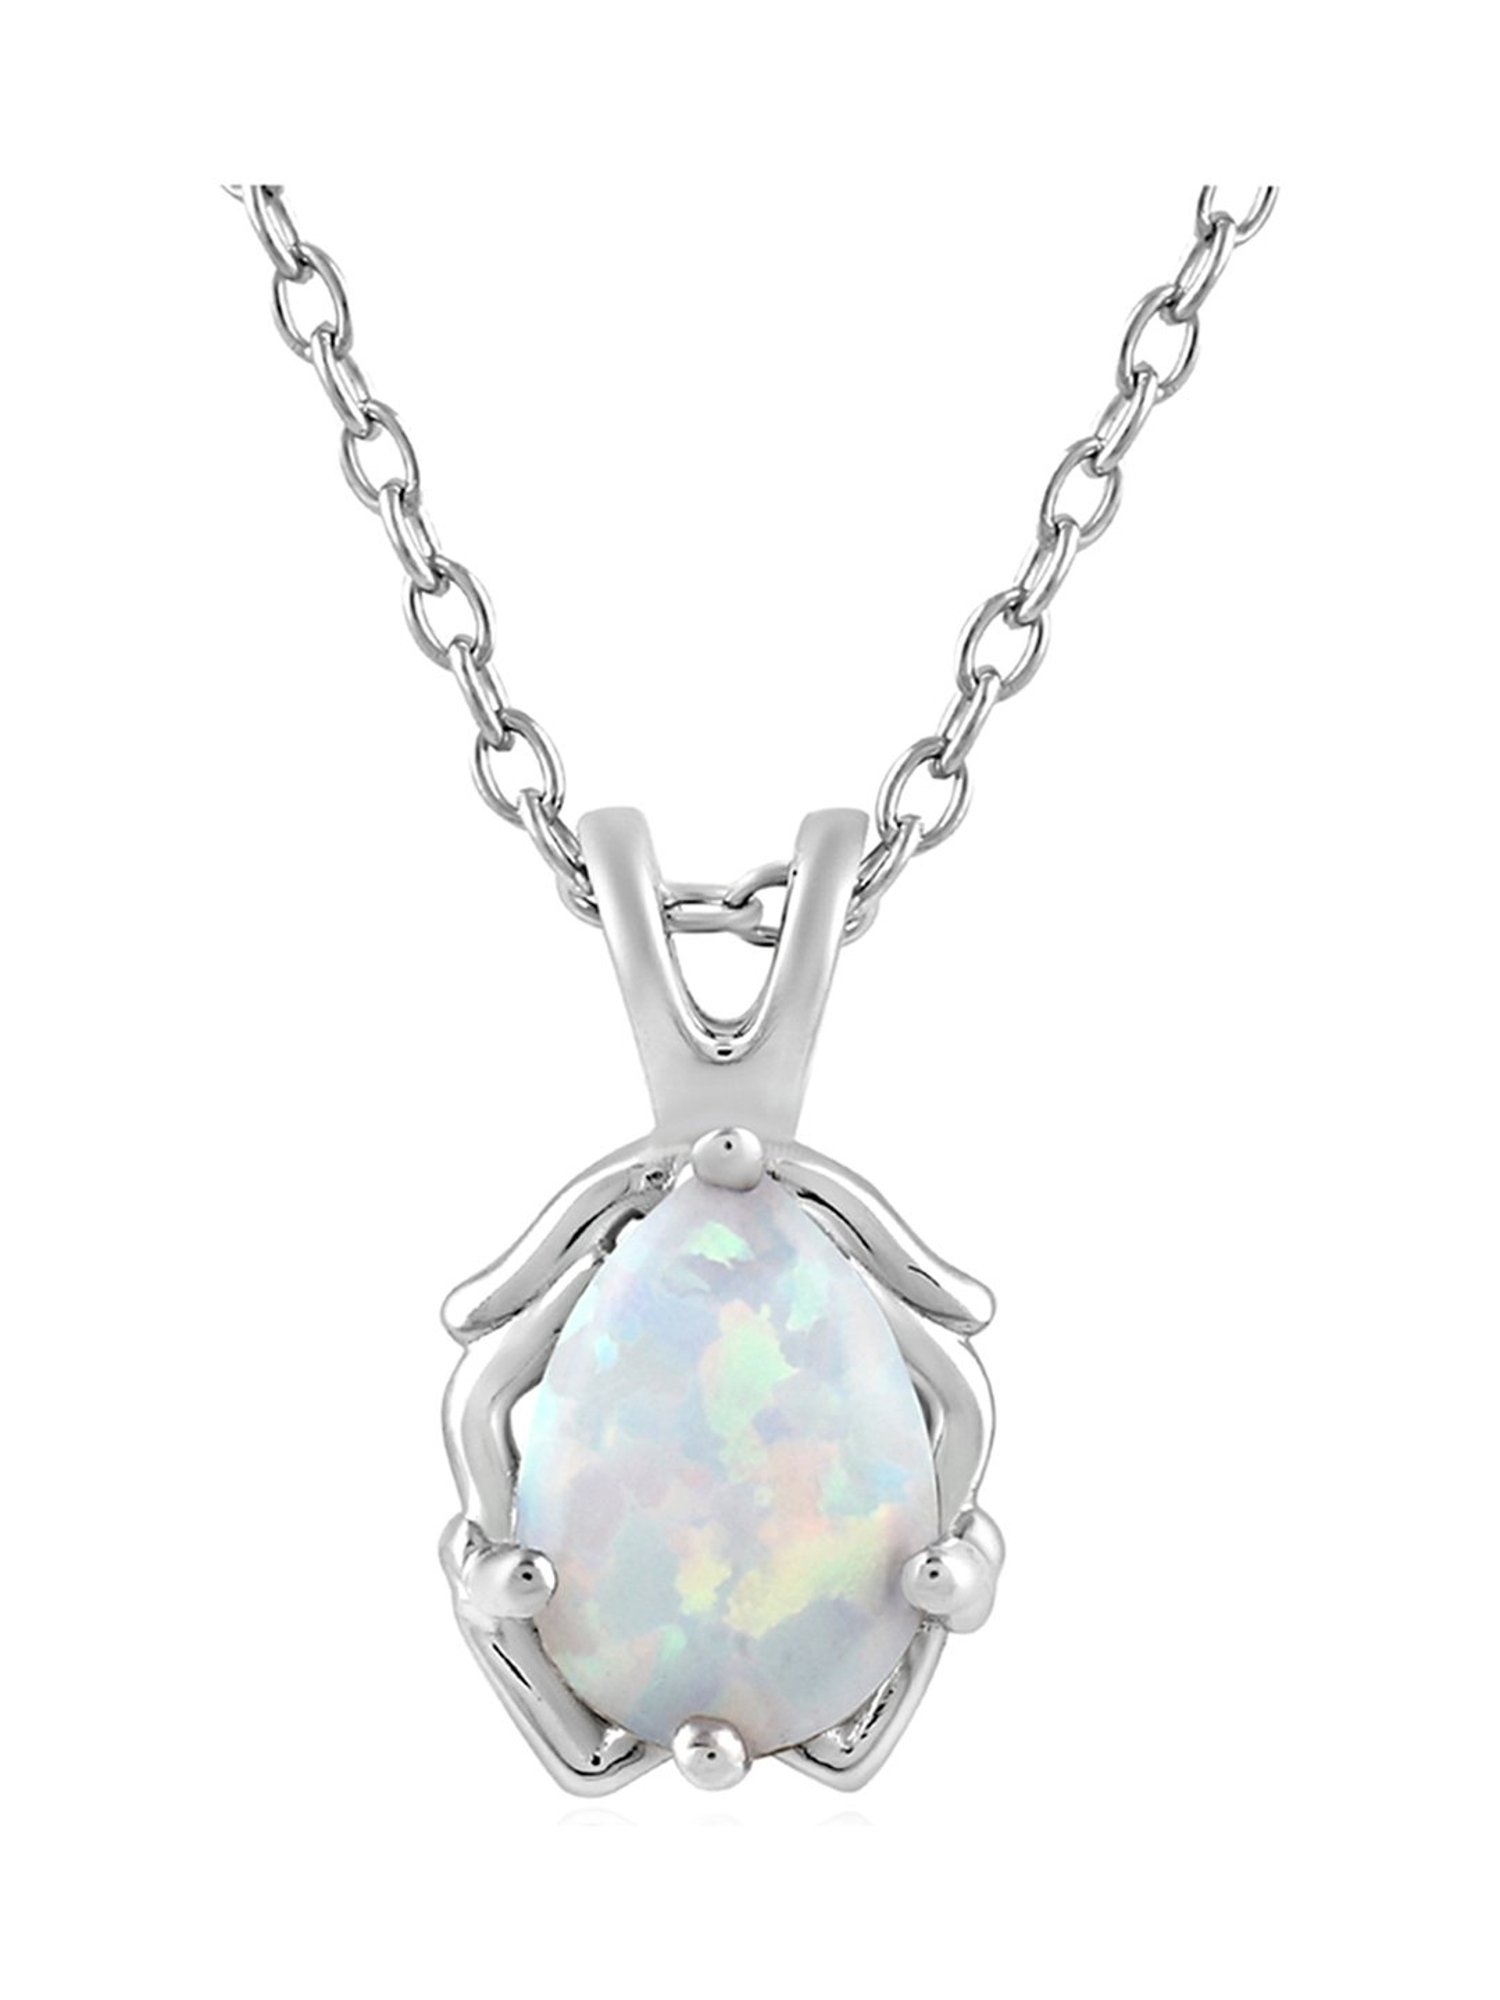 Pear-shaped Opal Necklace – Forever Today by Jilco